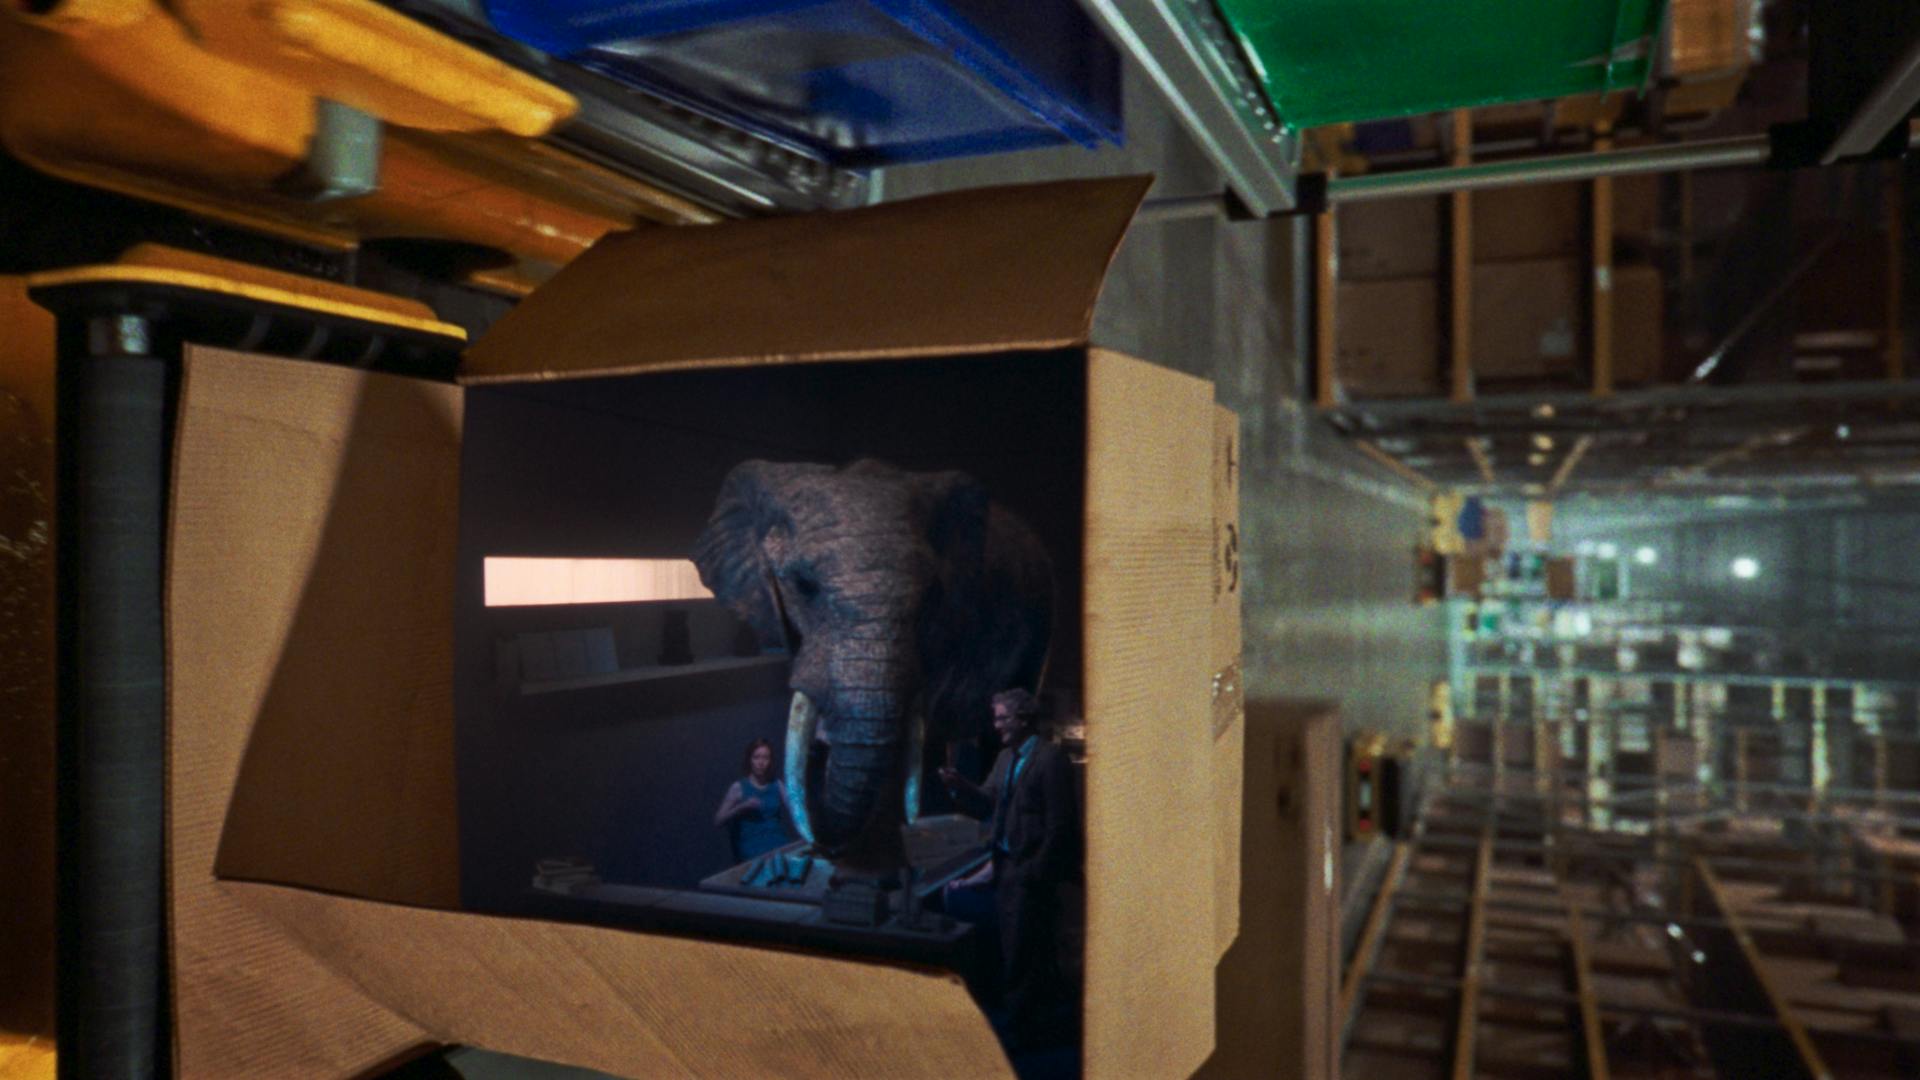 Still image from the new Channel 4 idents showing an elephant in a cube shaped space